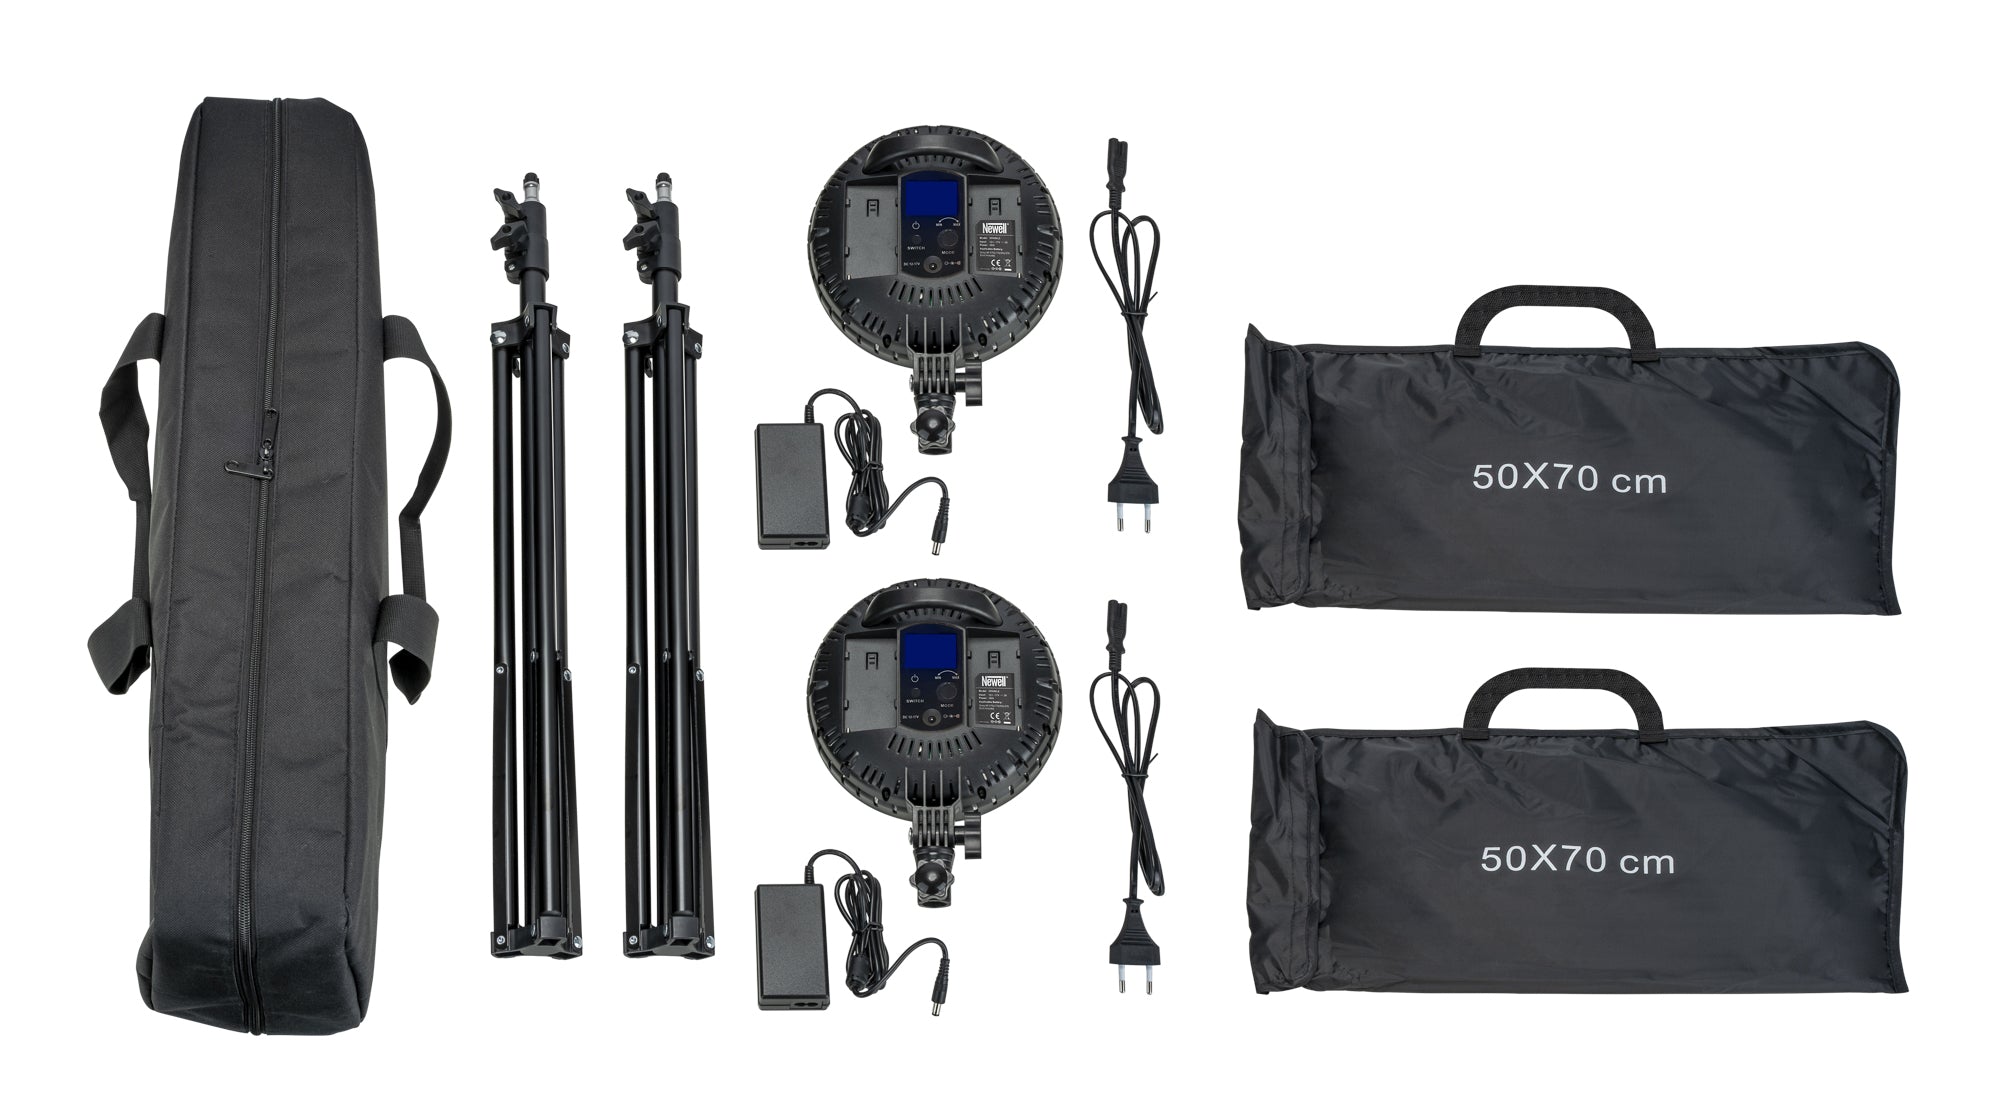 Newell Sparkle LED lighting kit for product photography